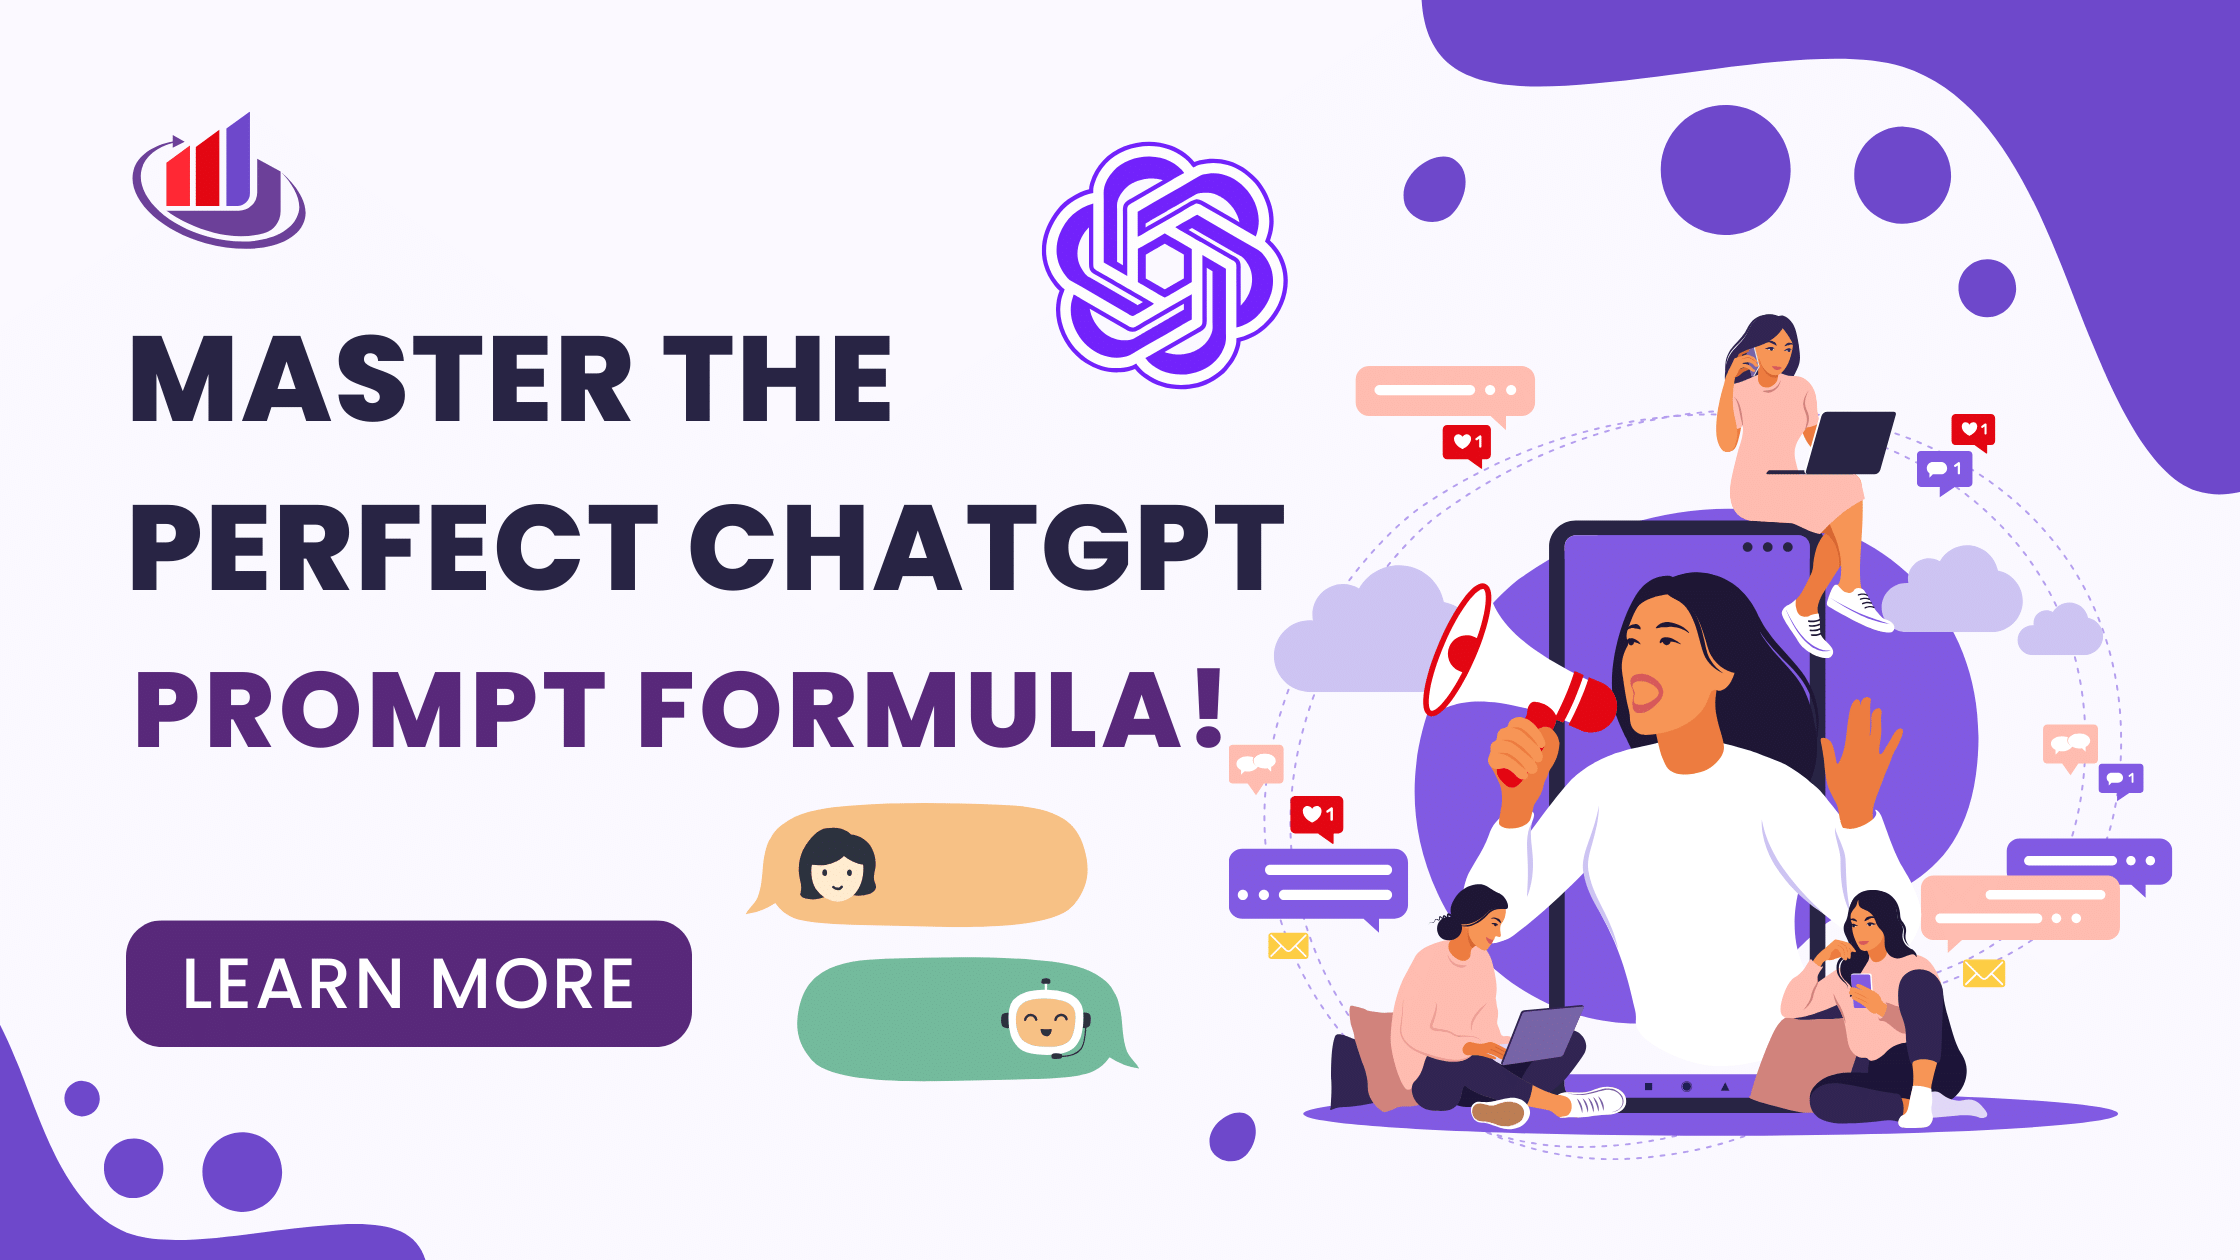 Master the Perfect ChatGPT Prompt Formula!